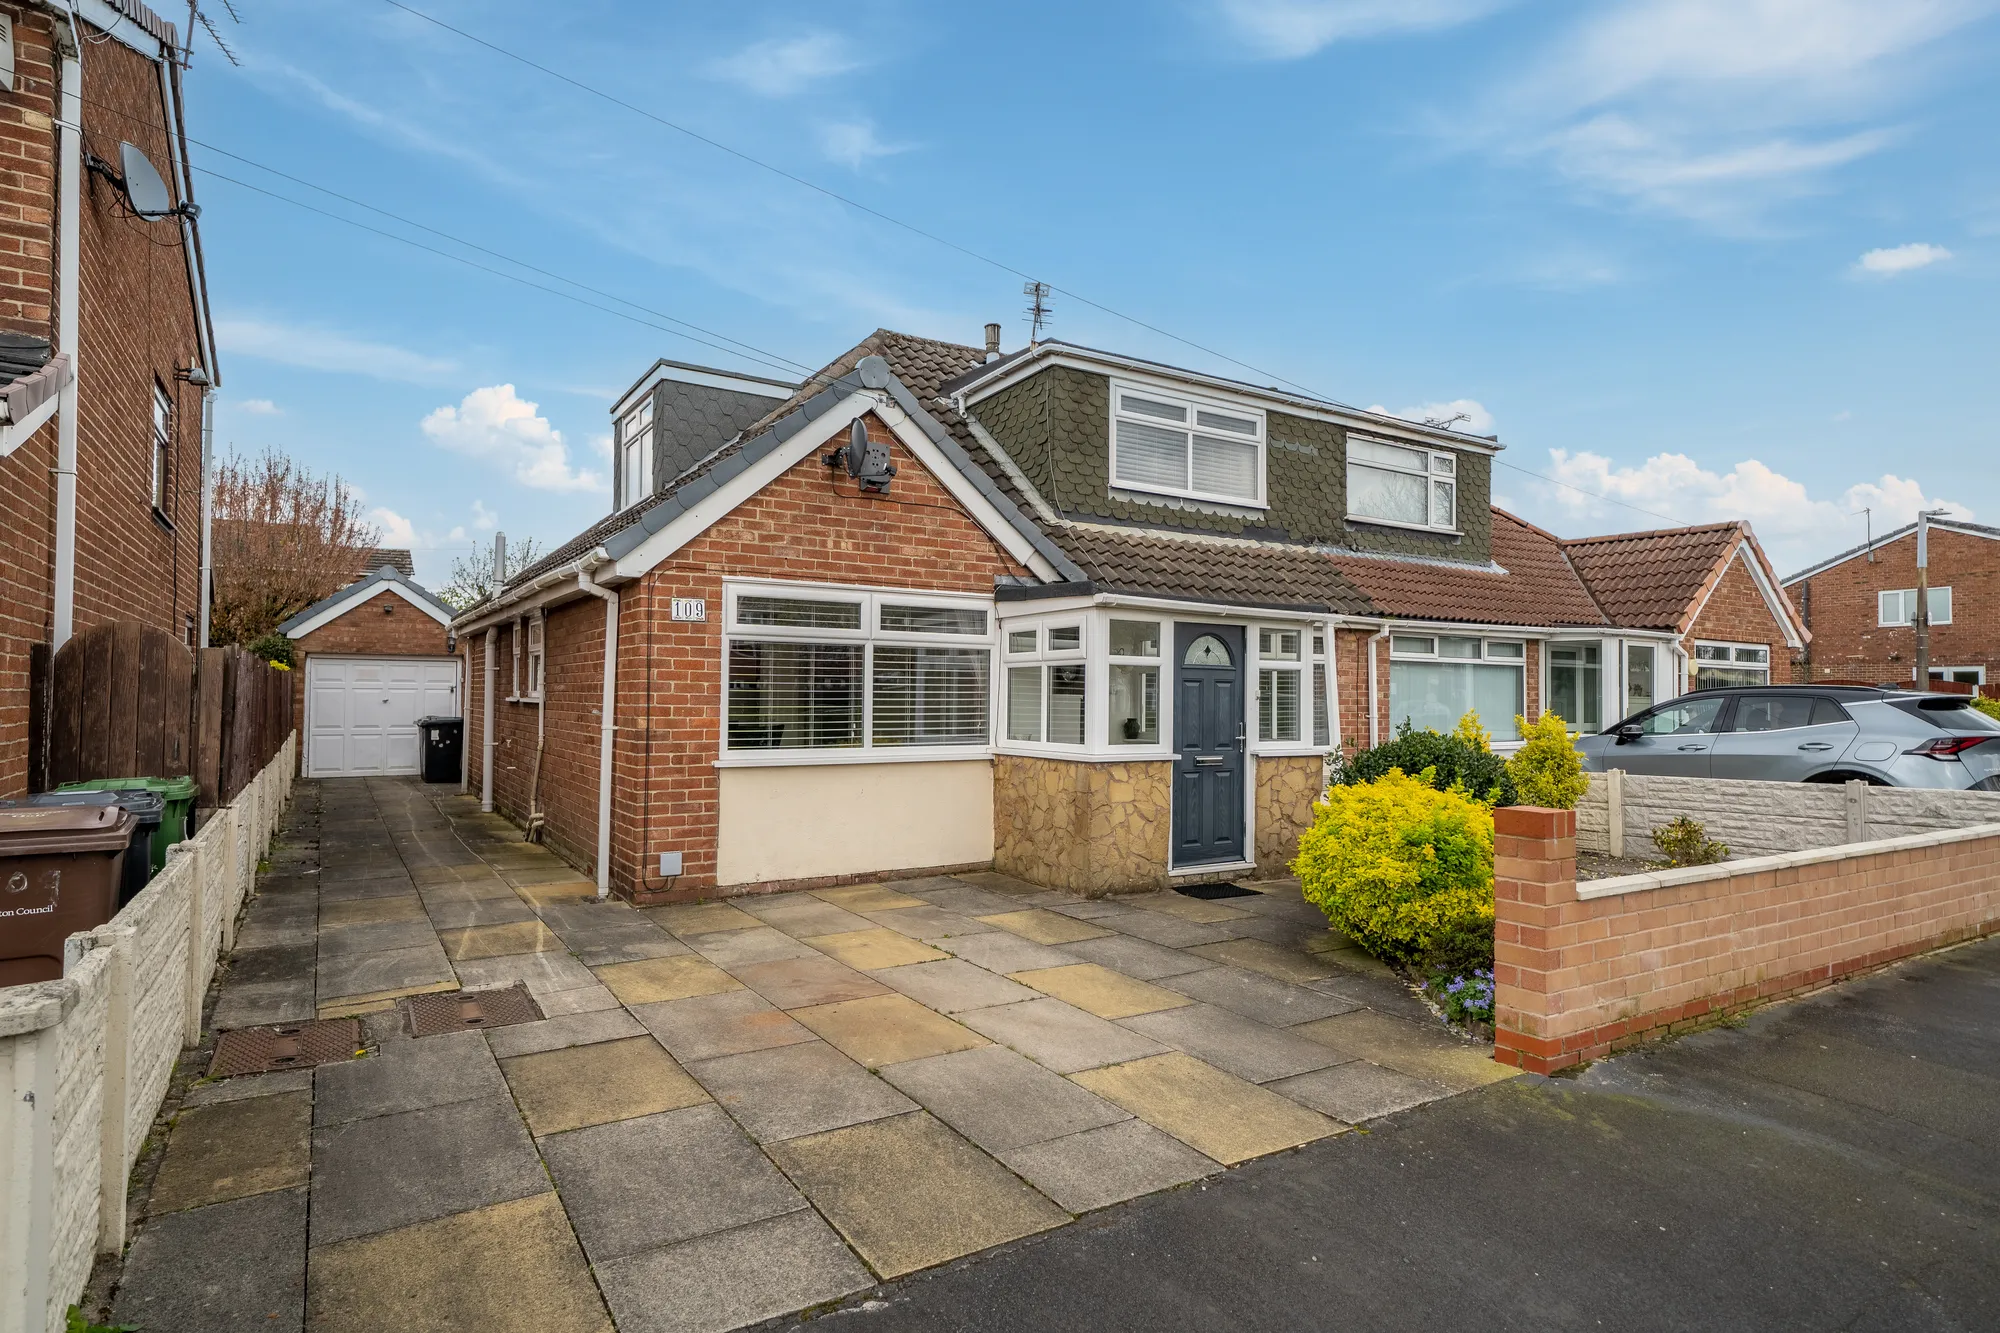 4 bed semi-detached bungalow for sale in Moss Lane, Liverpool - Property Image 1